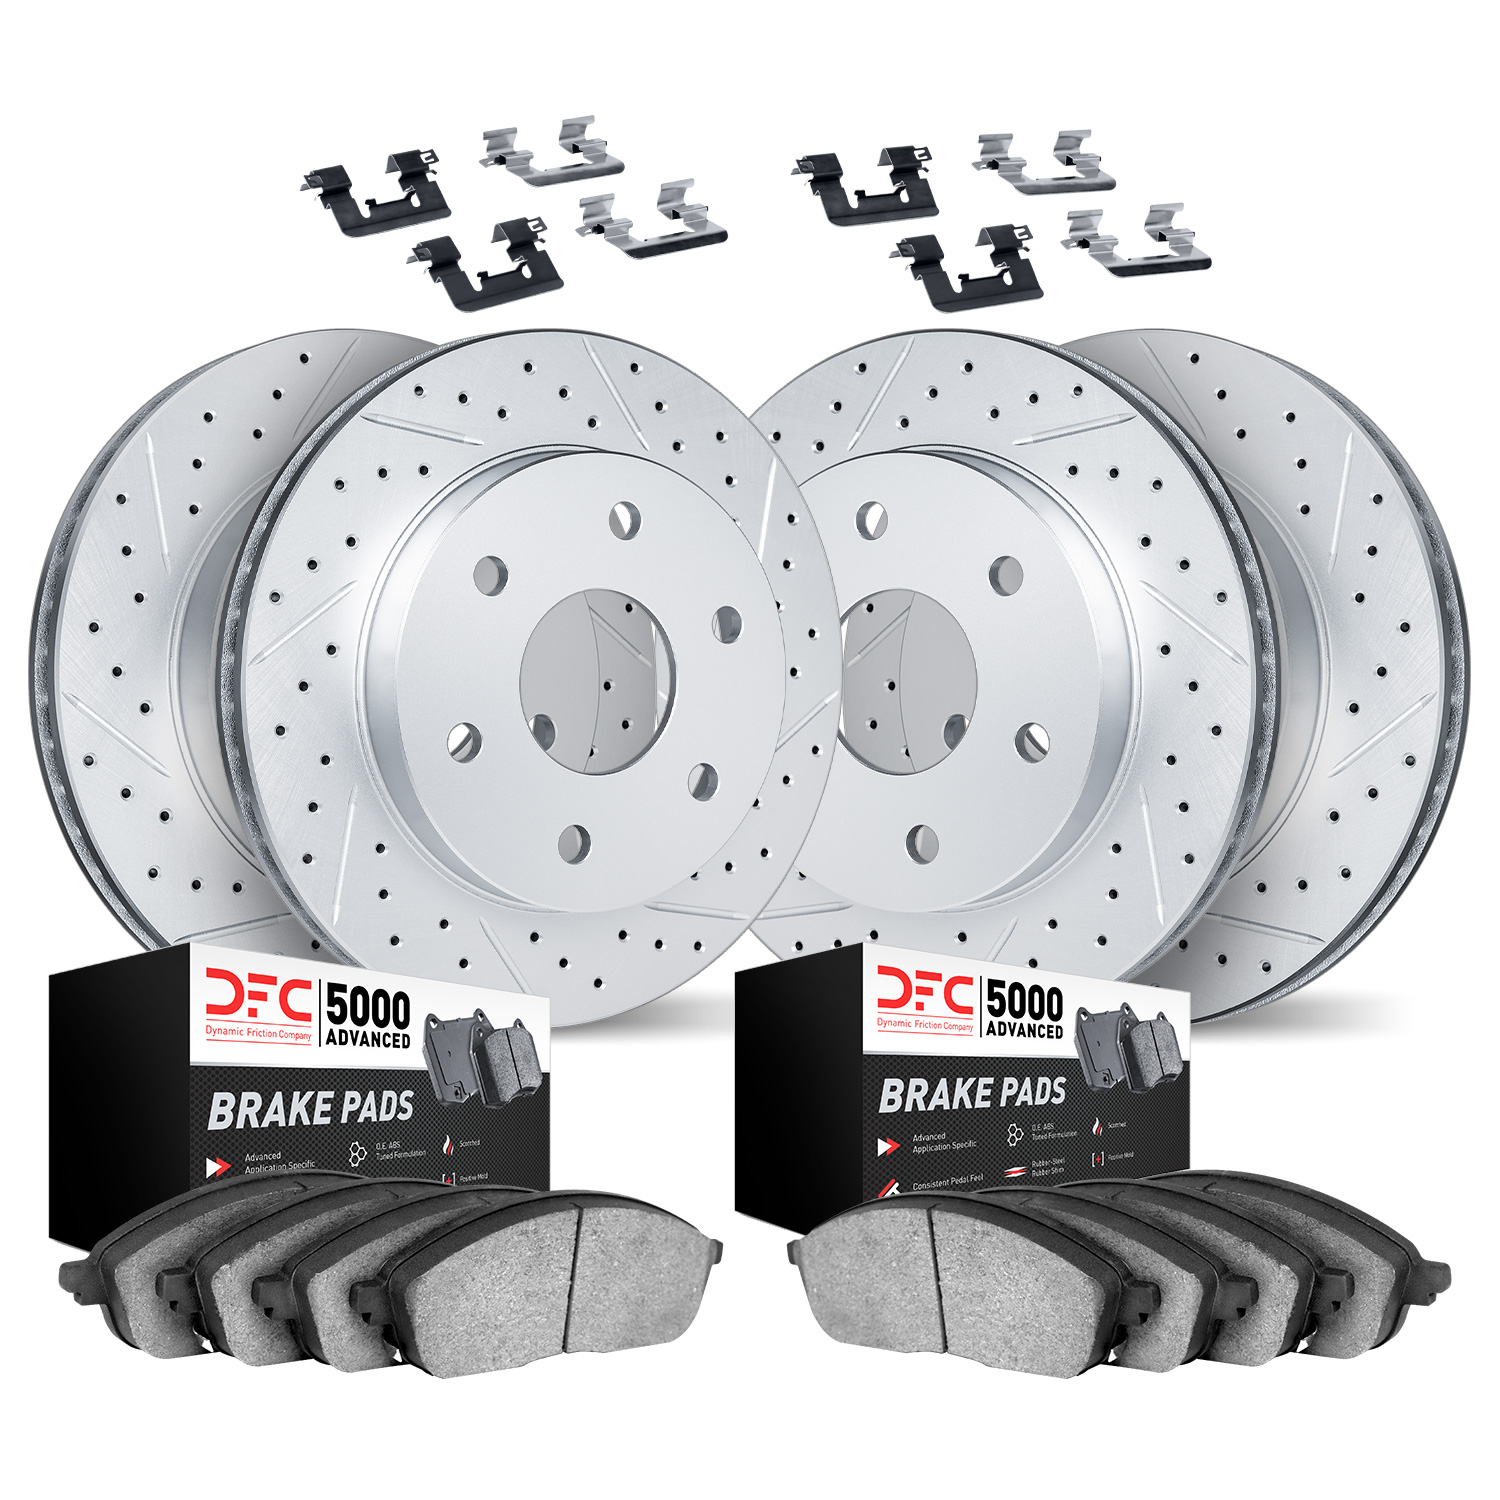 2514-46048 Geoperformance Drilled/Slotted Rotors w/5000 Advanced Brake Pads Kit & Hardware, 2017-2020 GM, Position: Front and Re